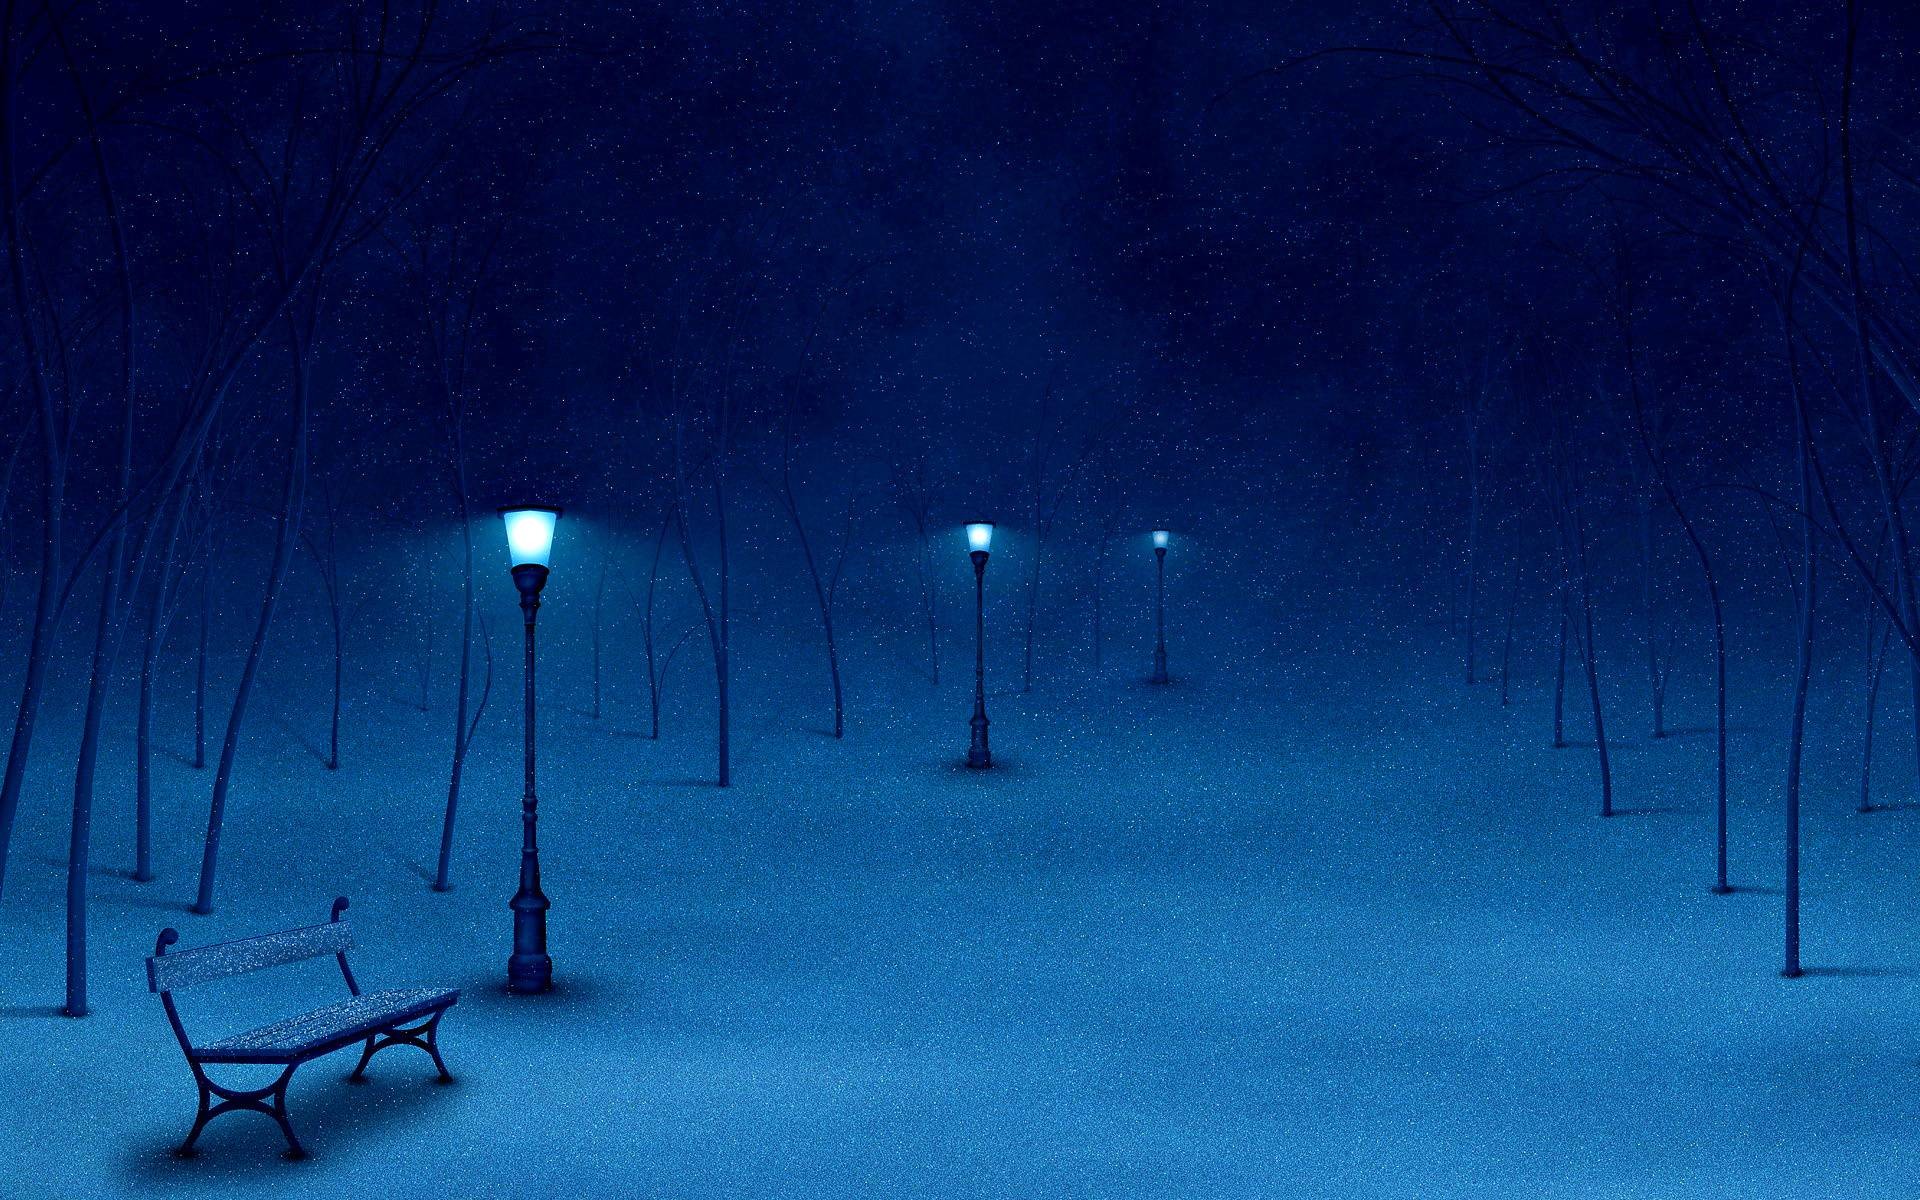 1920x1200 Winter Night Wallpapers HD Nature Wallpaper | HD Wallpapers | Pinterest |  Winter night, Wallpaper and Wallpapers android